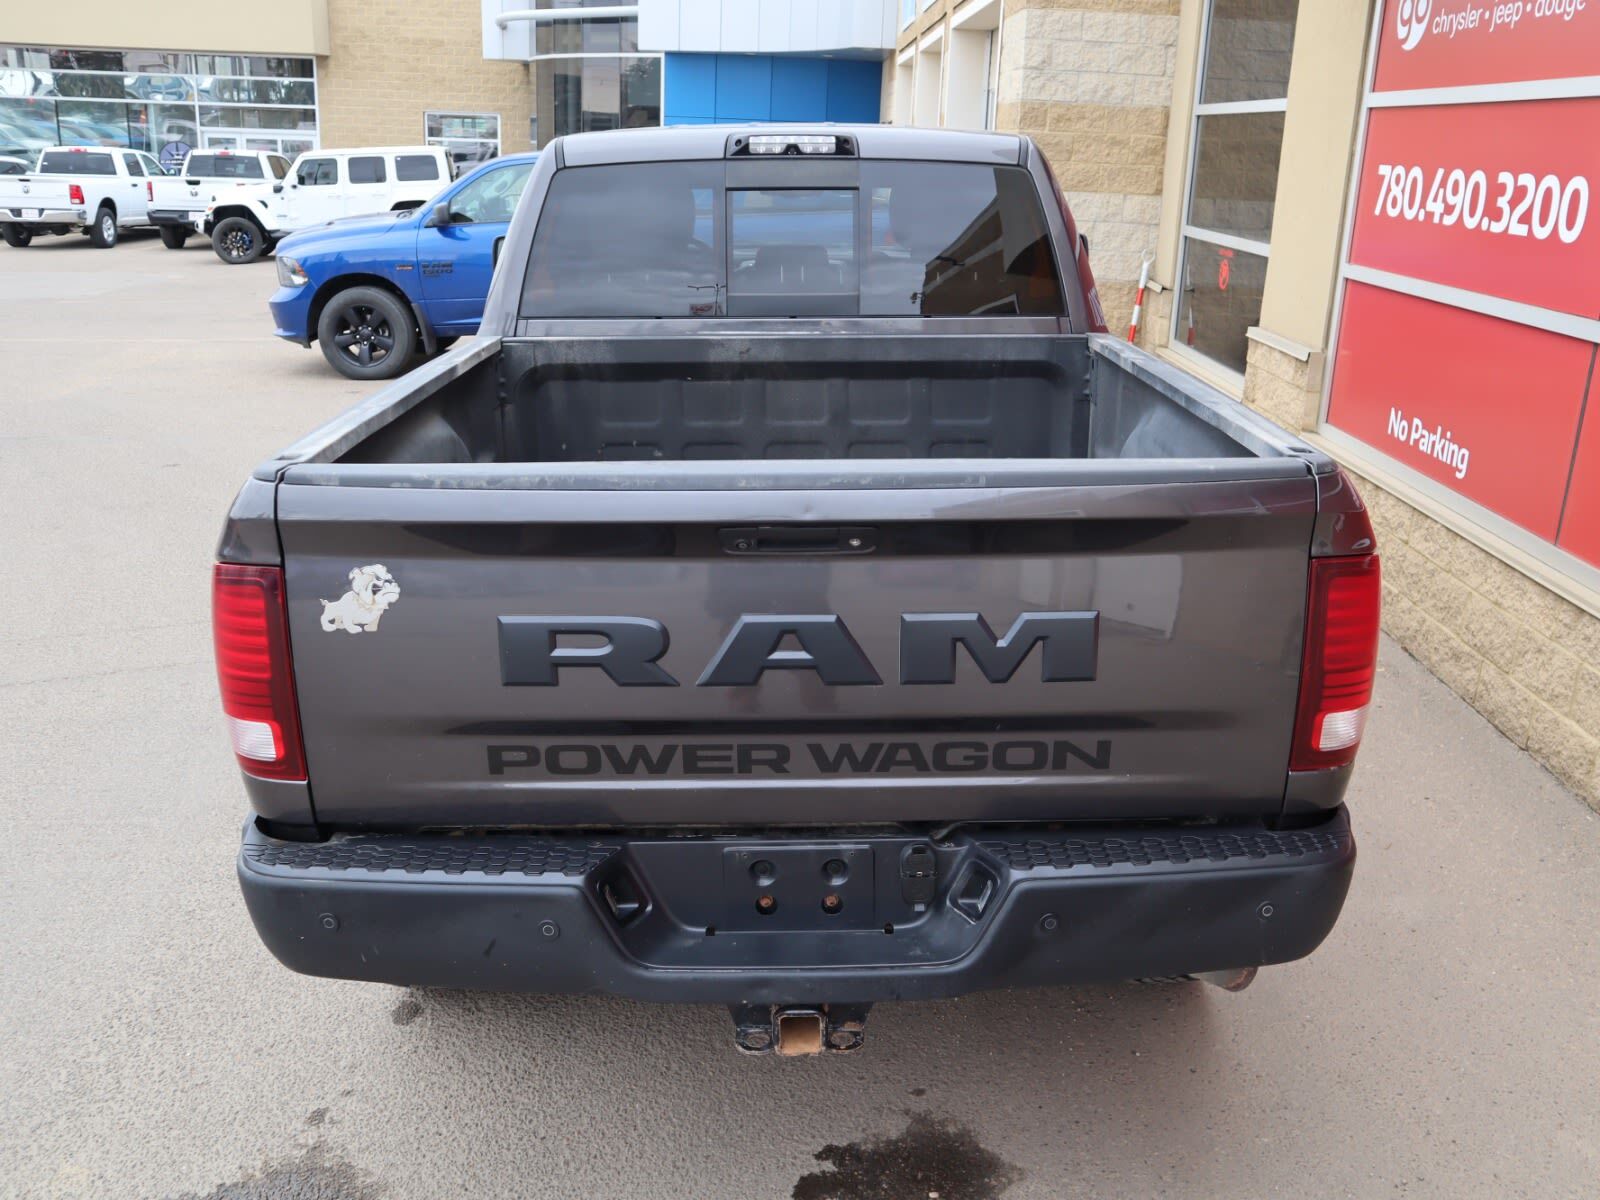 2018 Ram 2500  POWER WAGON IN GRANITE CRYSTAL EQUIPPED WITH A 6.